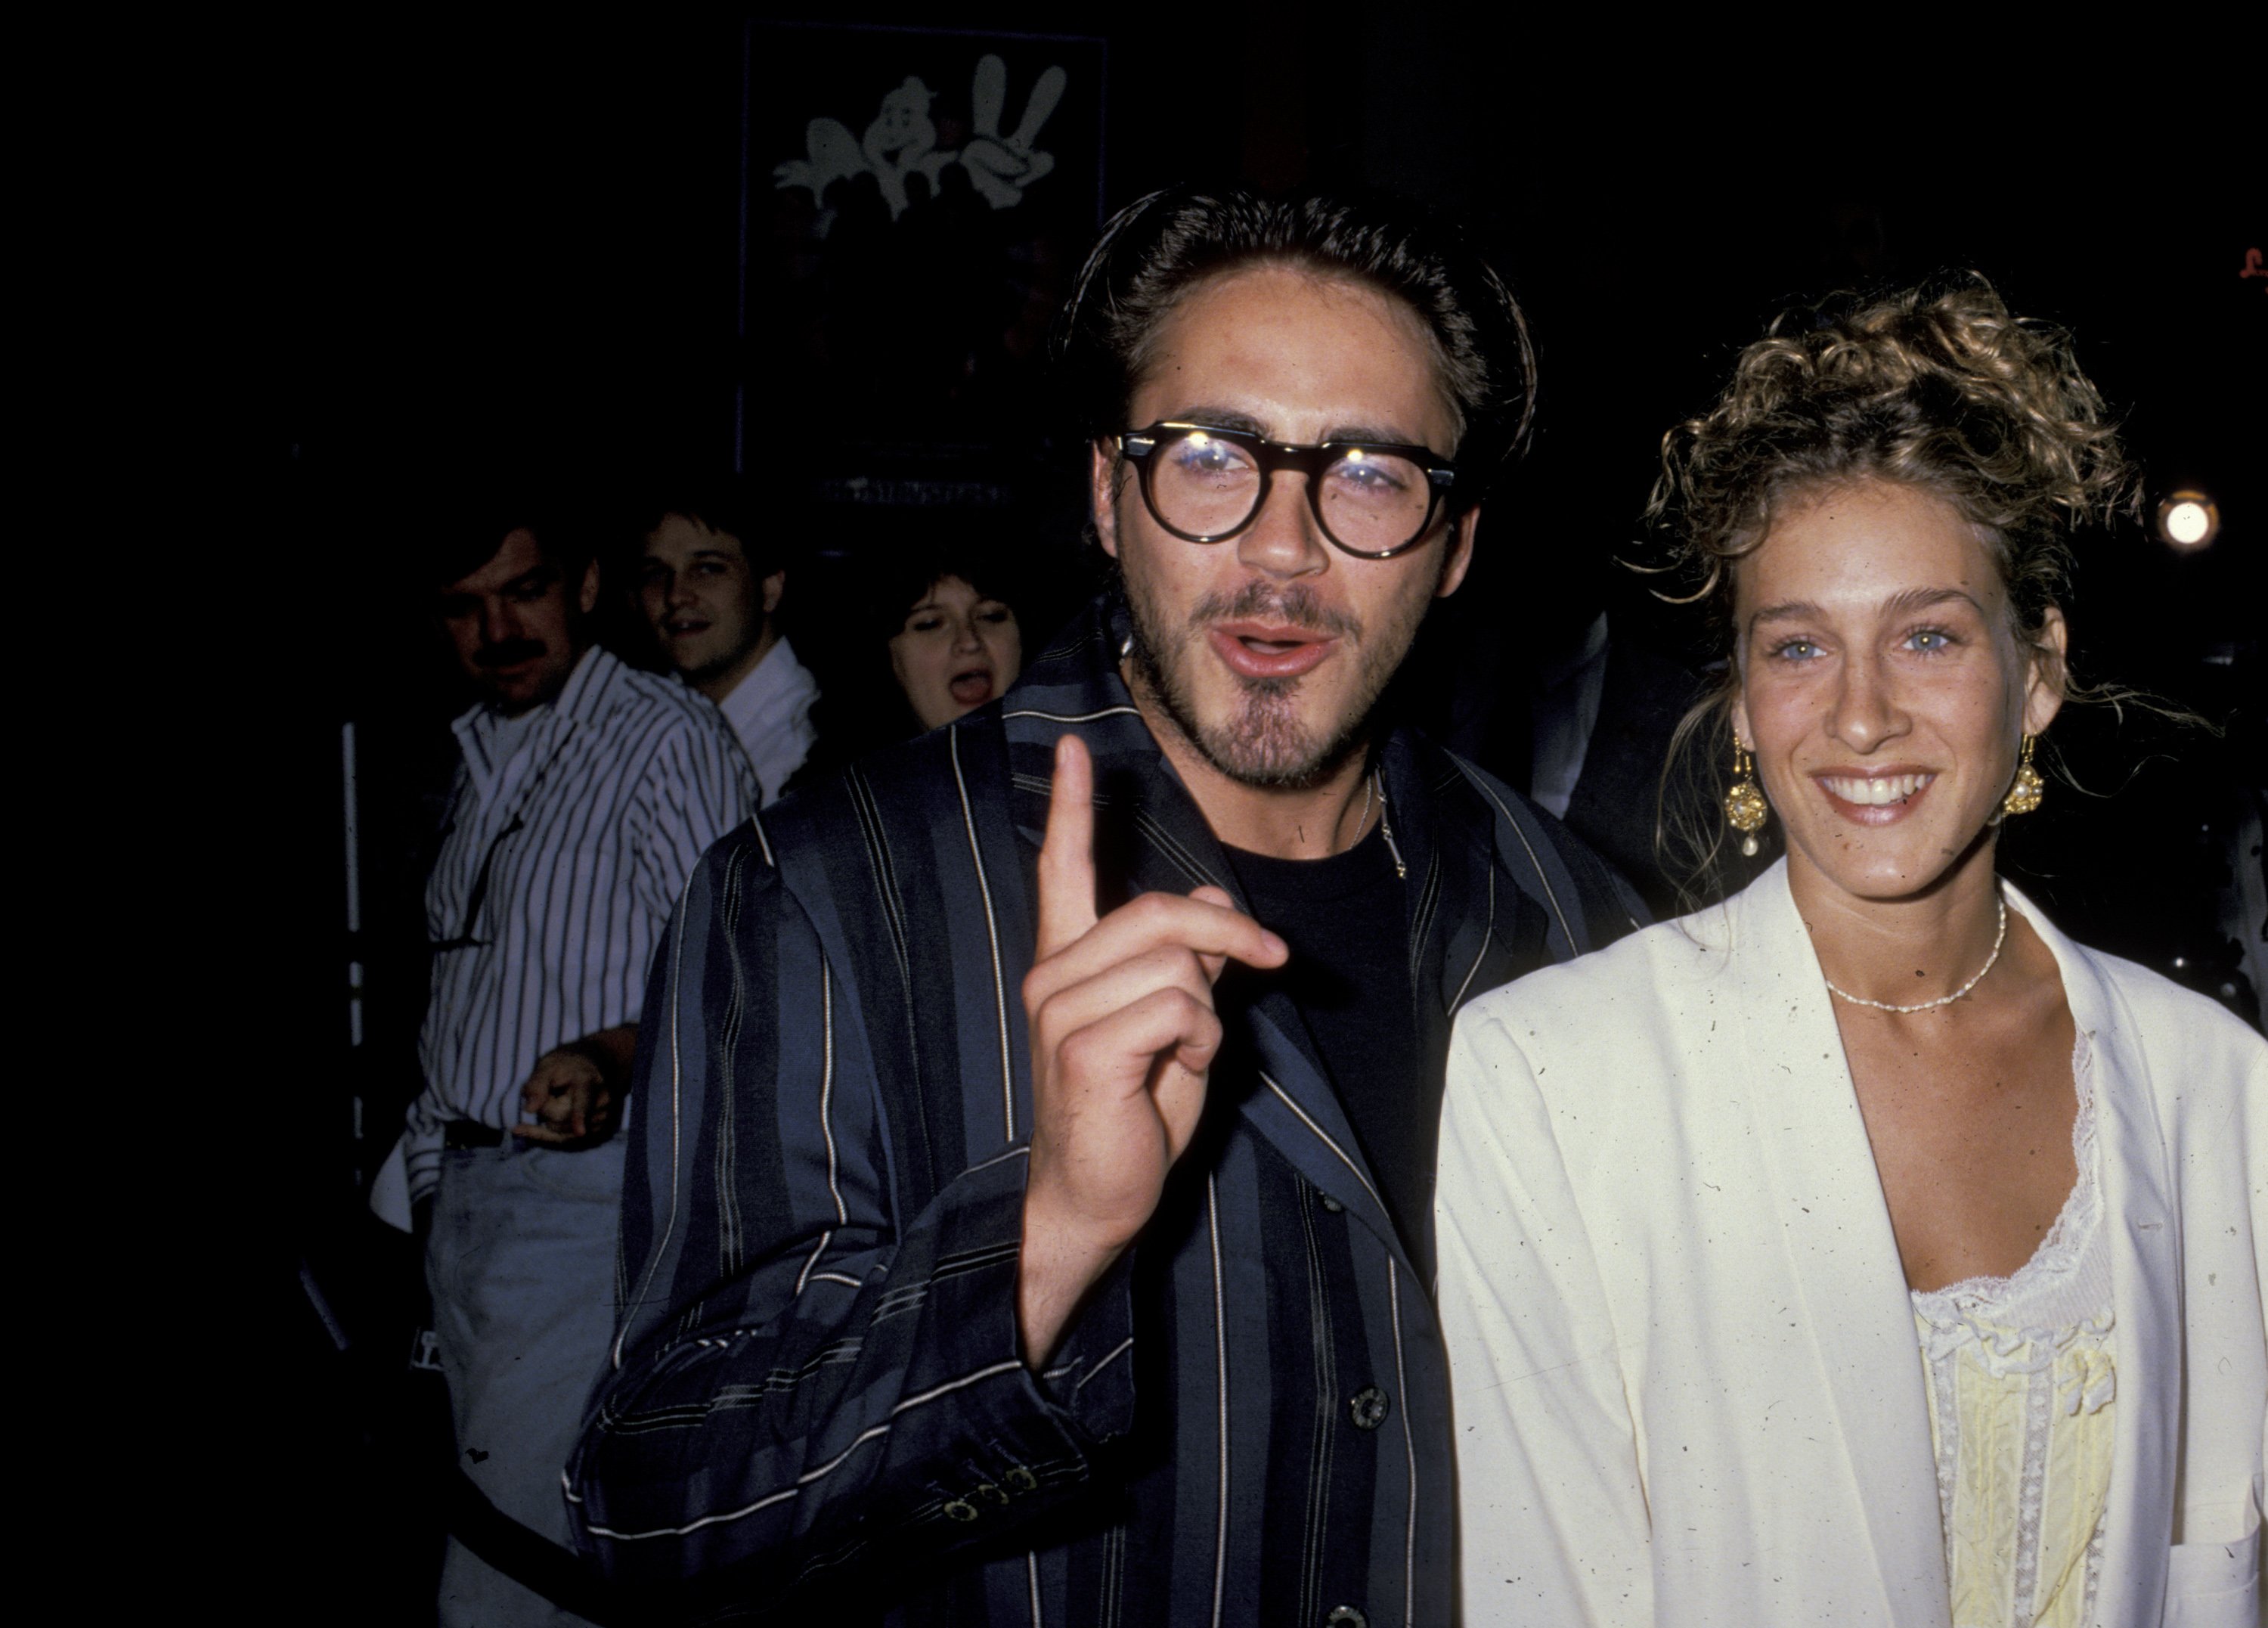 Sarah Jessica Parker and Robert Downey Jr. attend the 'Ghostbusters II' premiere in 1990